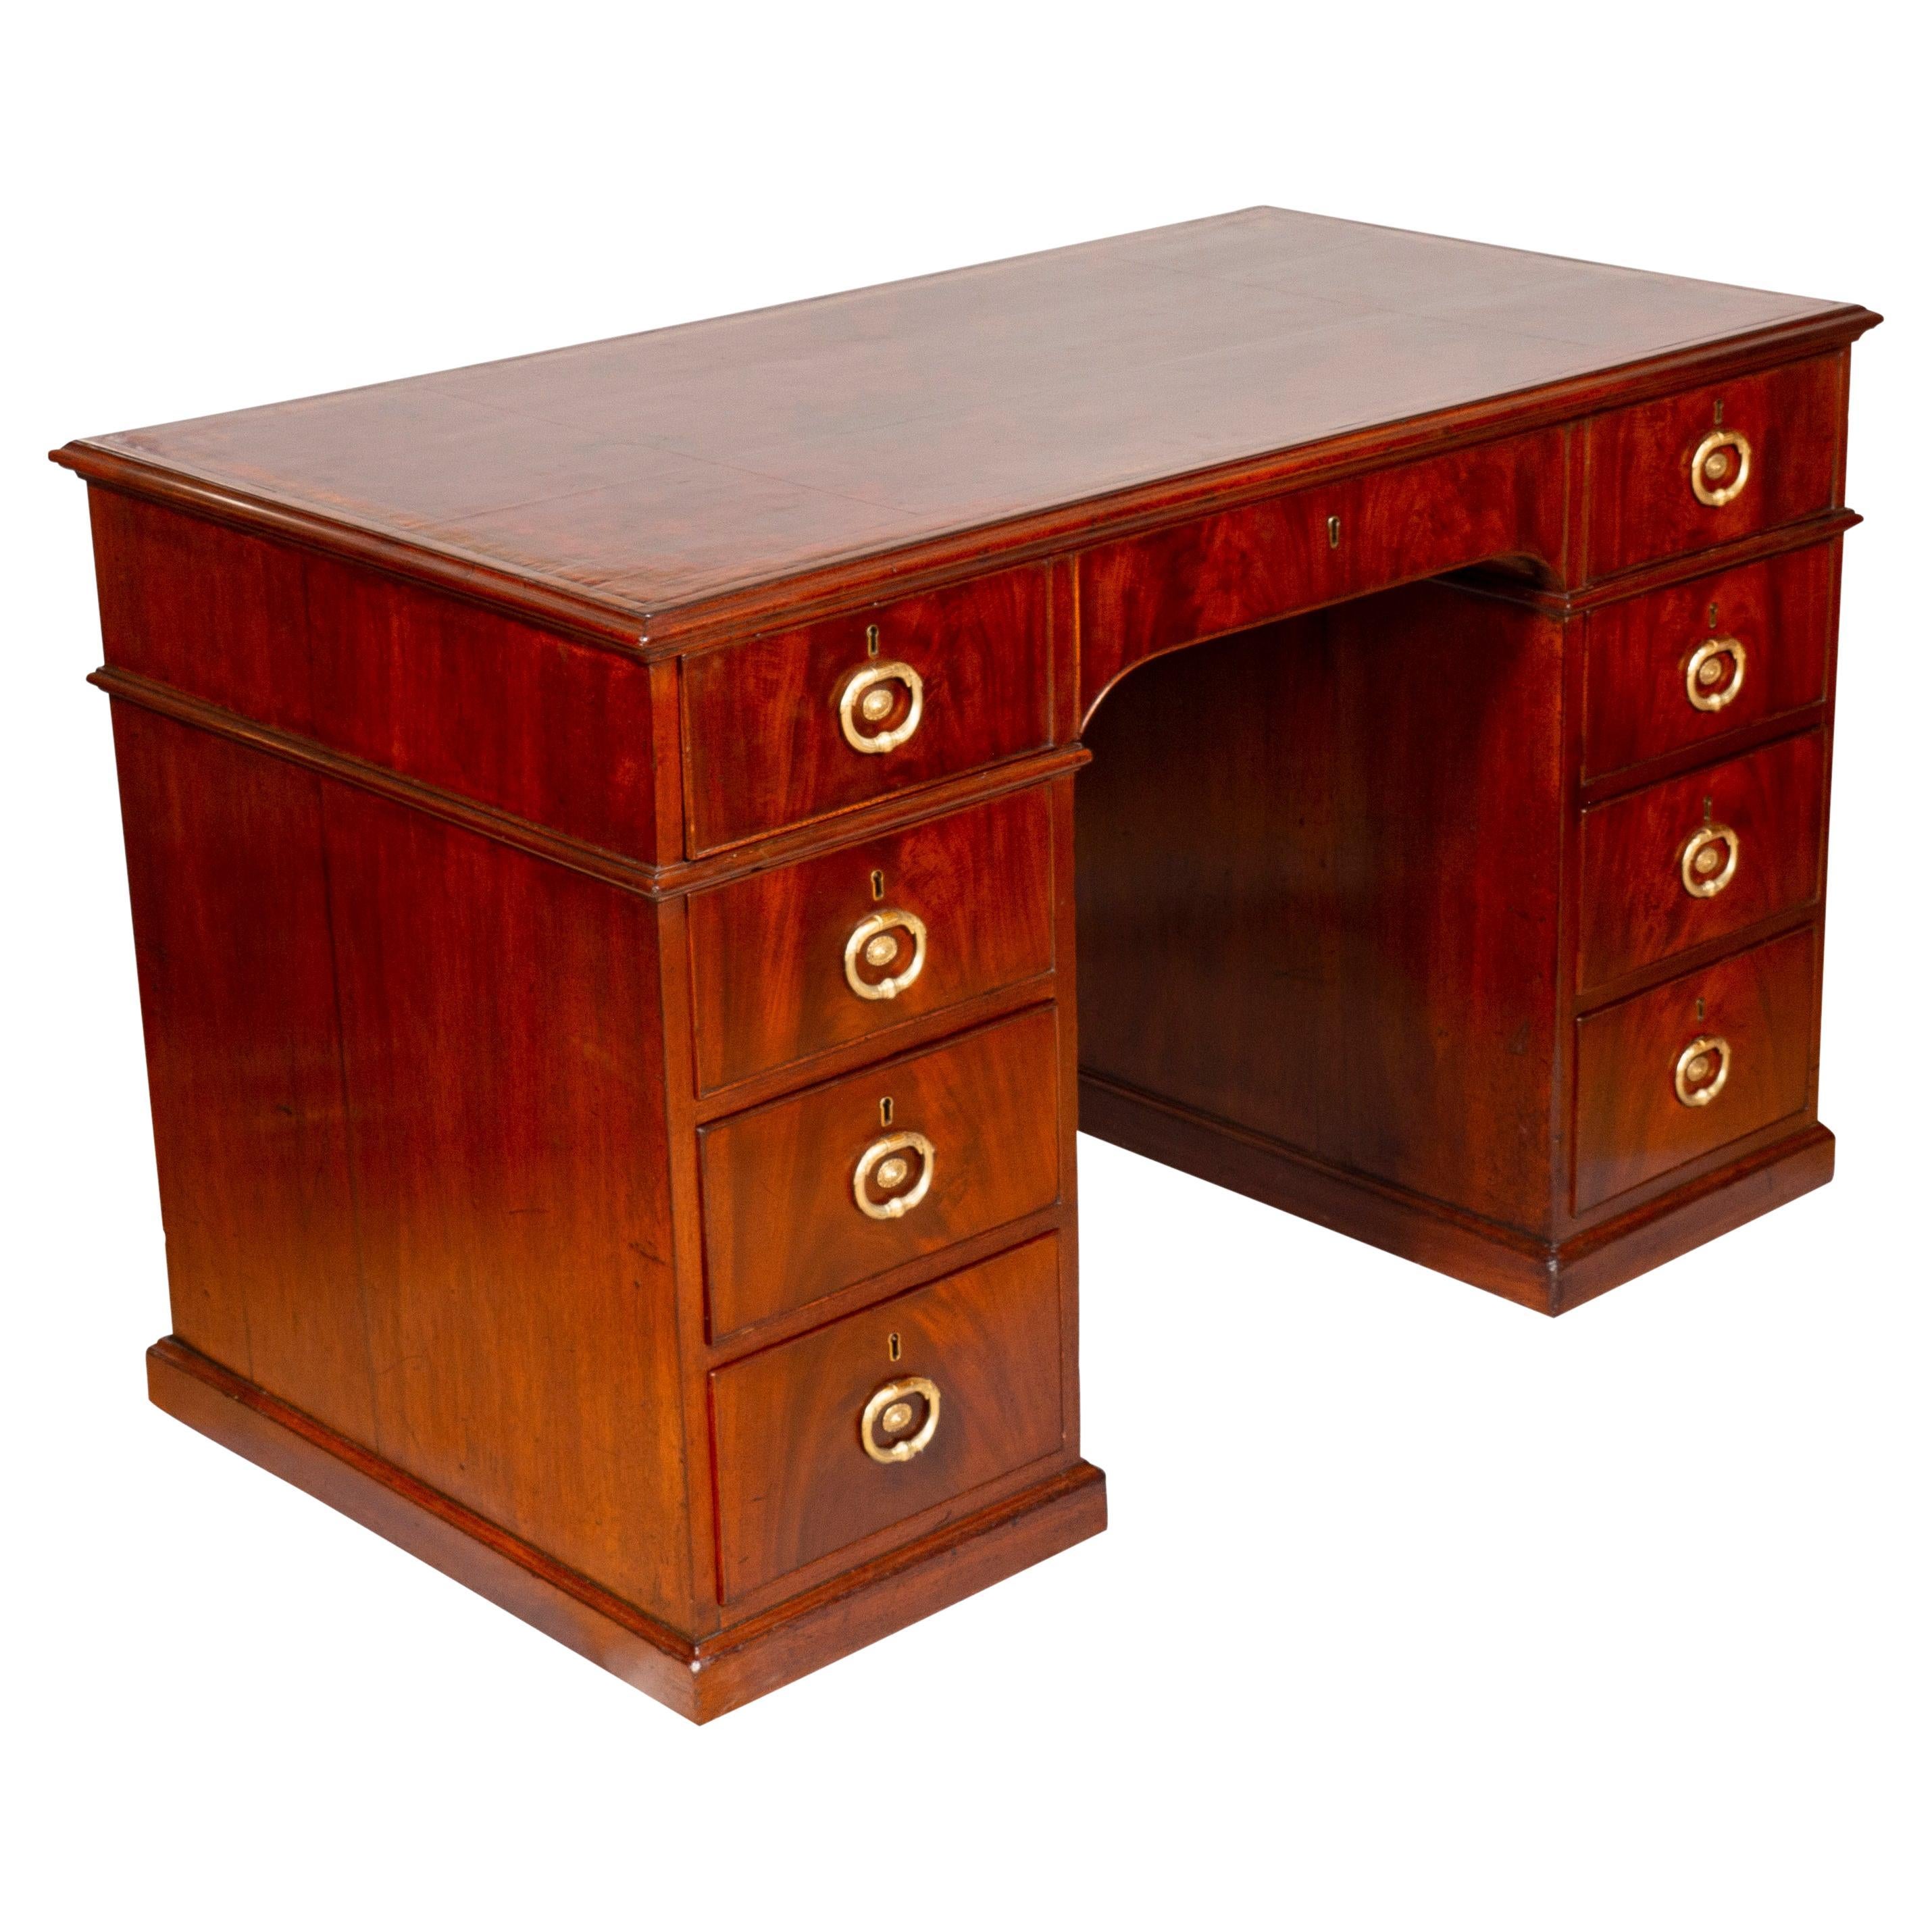 With rectangular top with inset red leather and banded edge, over a long drawer opening to A-Z lidded compartments. The pedestals below each with three drawers. All with classic Gillow handles. A similar desk illustrated in the two volume book on